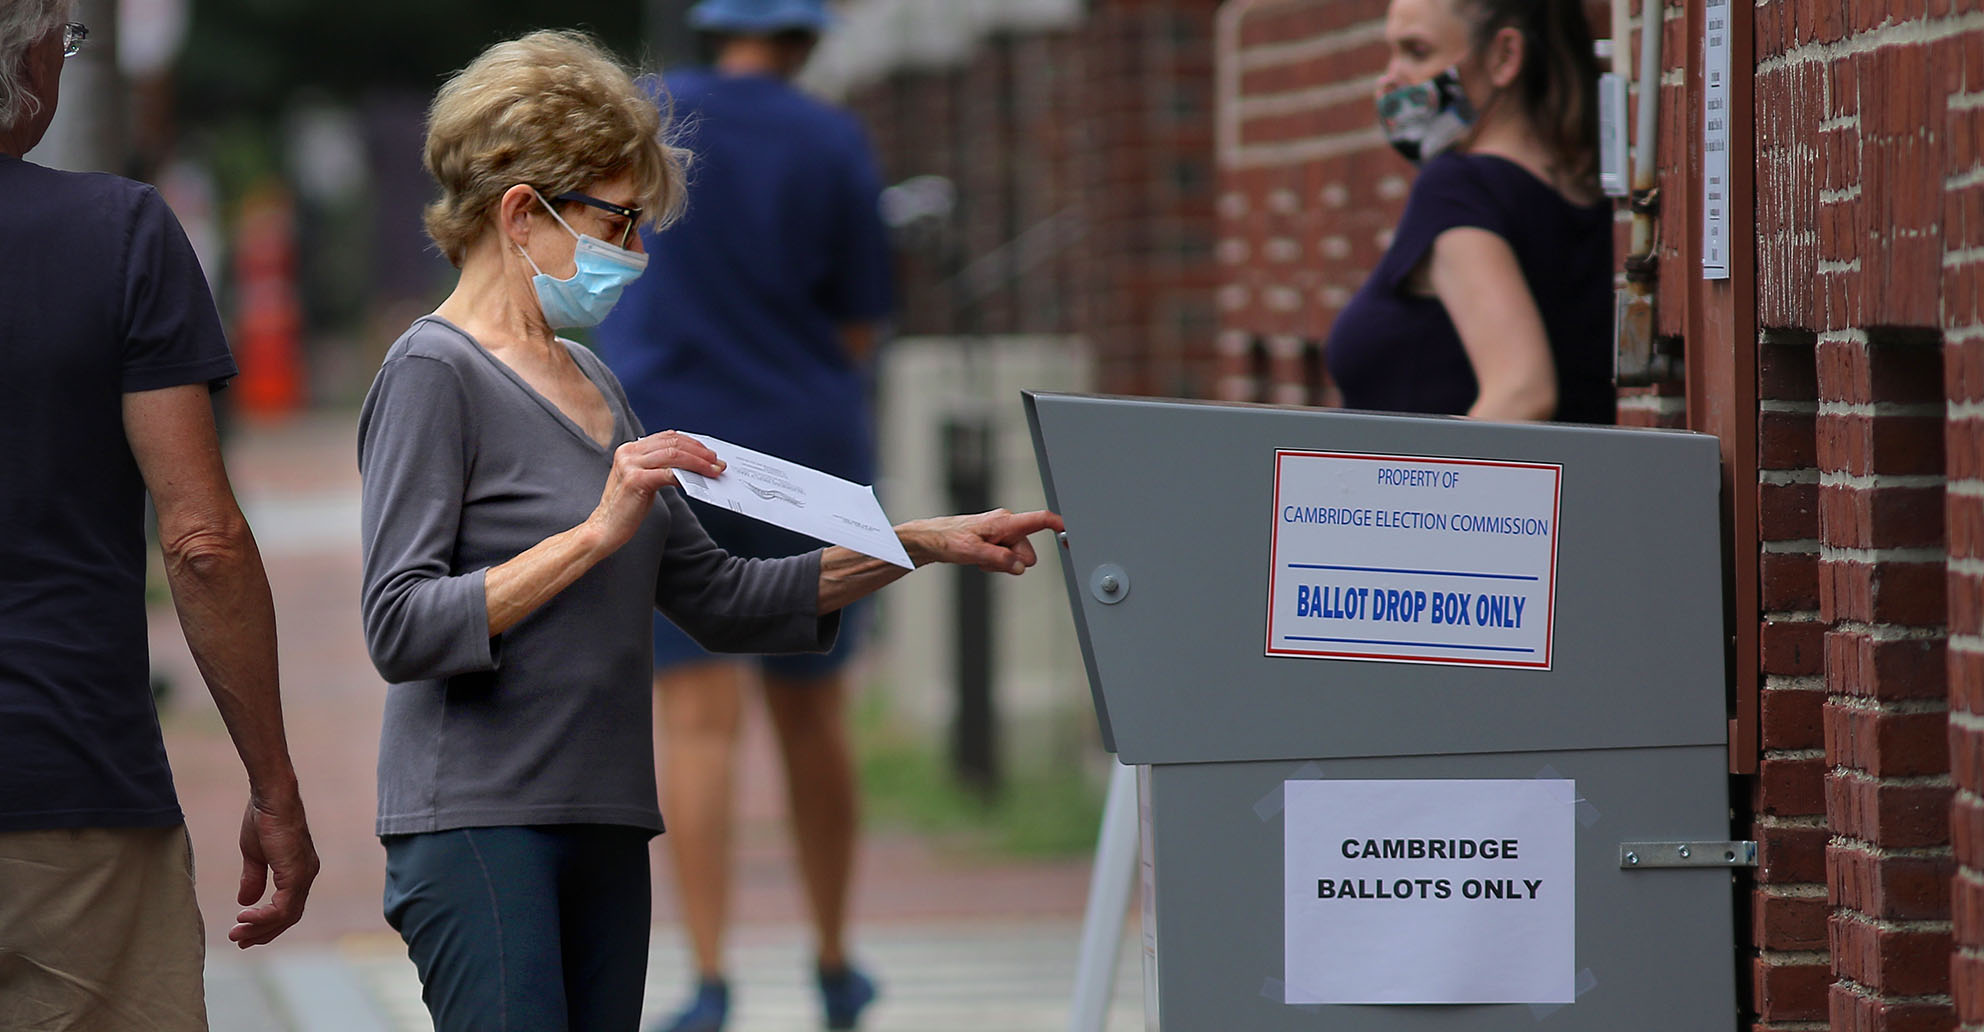 How 'Weaponizing' Mail-In Ballots Could Create Constitutional Crisis